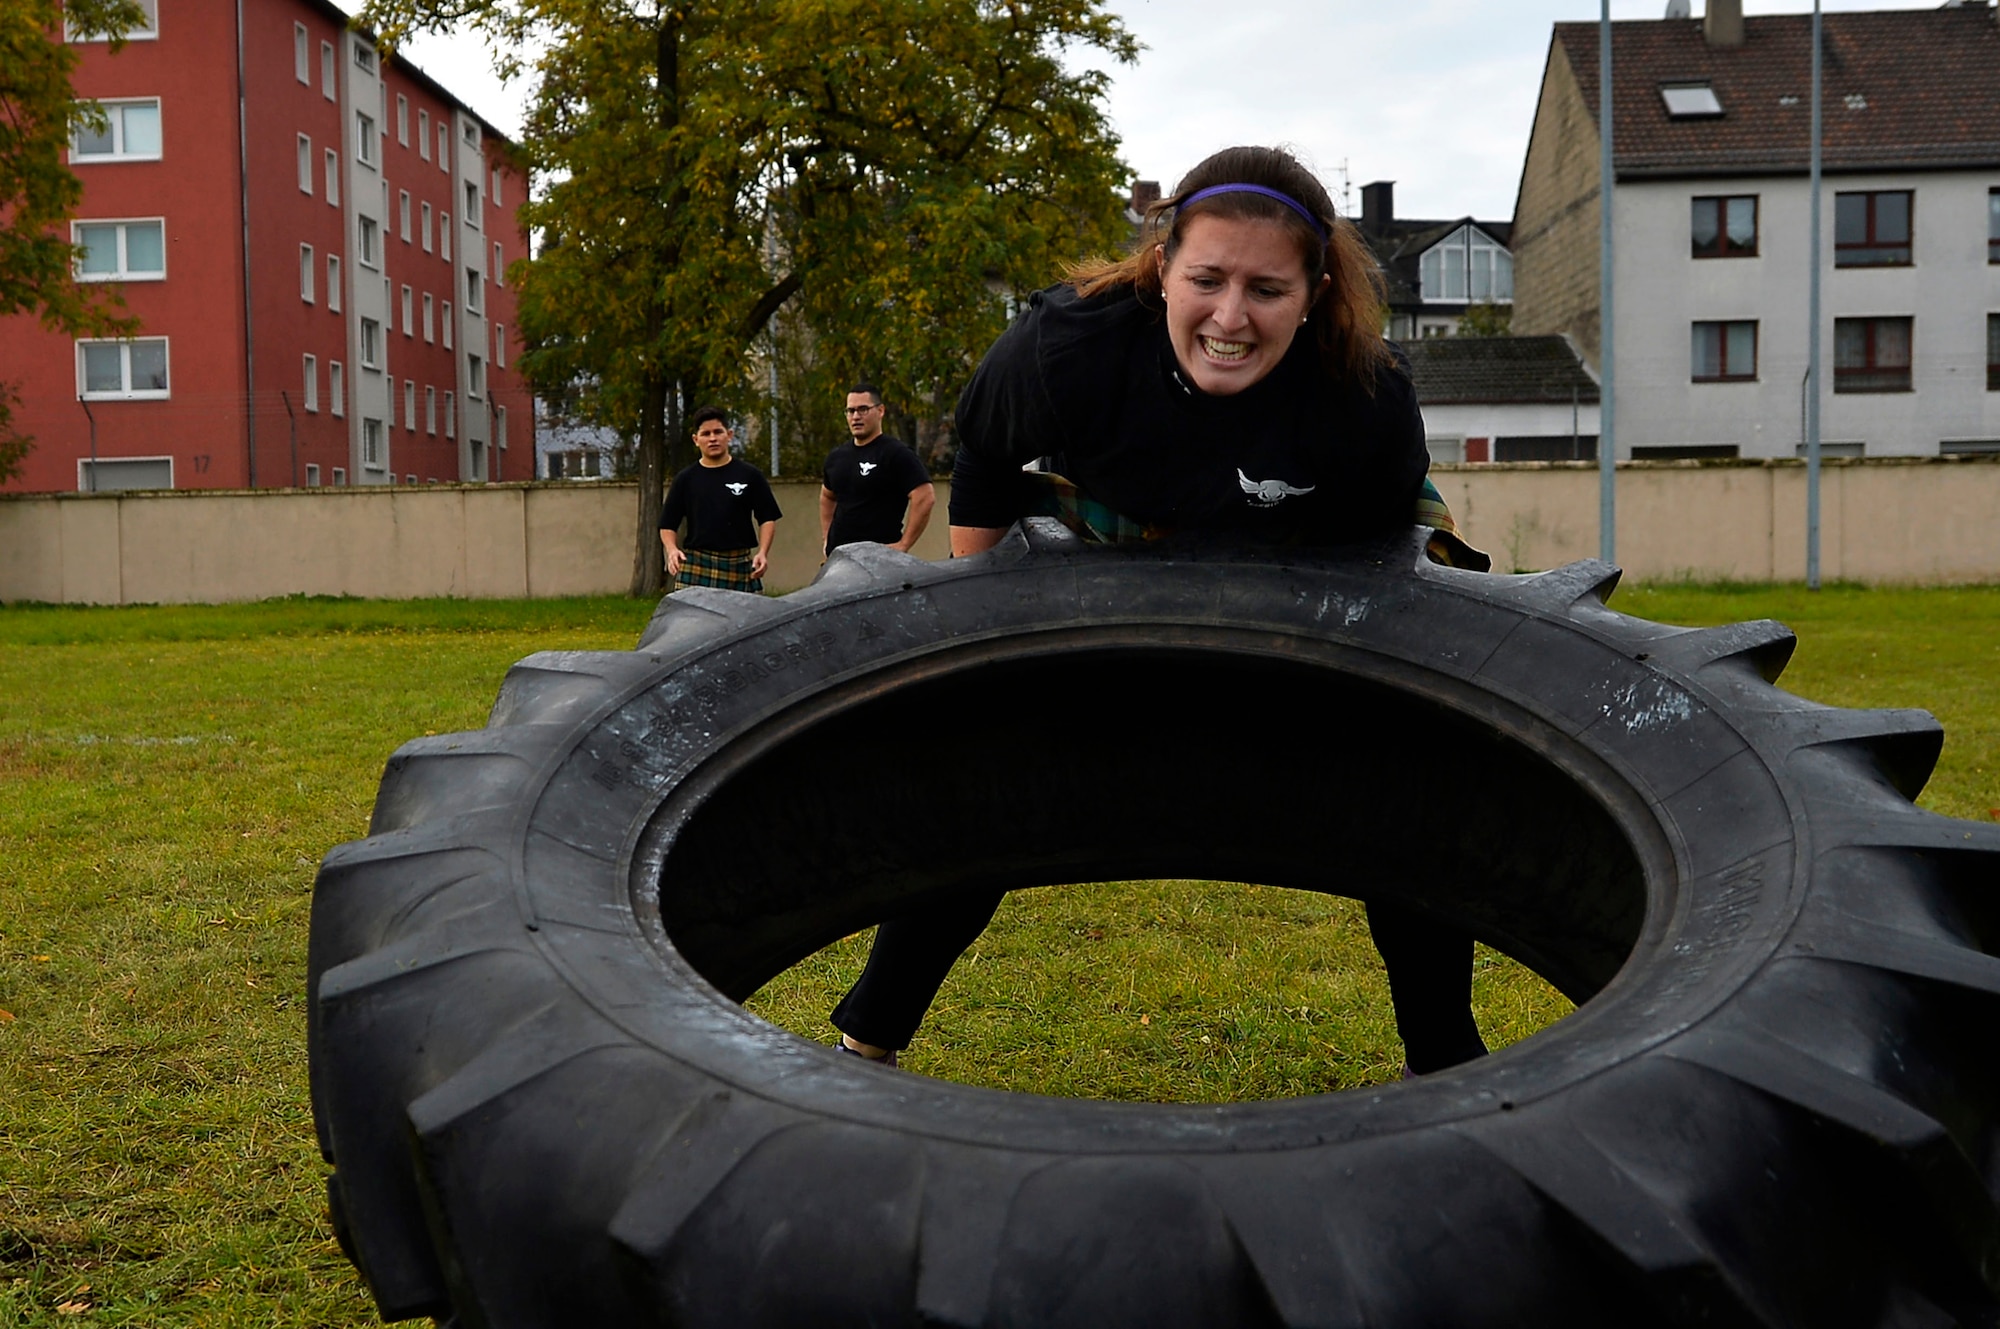 U.S. Air Force 1st Lt. Courtney Sheeks, 450th Intelligence Squadron Central Command analysis team director, participates in a tire flip event during the 693rd Intelligence, Surveillance, and Reconnaissance Group’s Highland Games at Wiesbaden, Germany, Oct. 11, 2017. Other sporting events during the games included hammer throw, humvee pull, axe throwing and log toss. (U.S. Air Force photo by Airman 1st Class Joshua Magbanua)